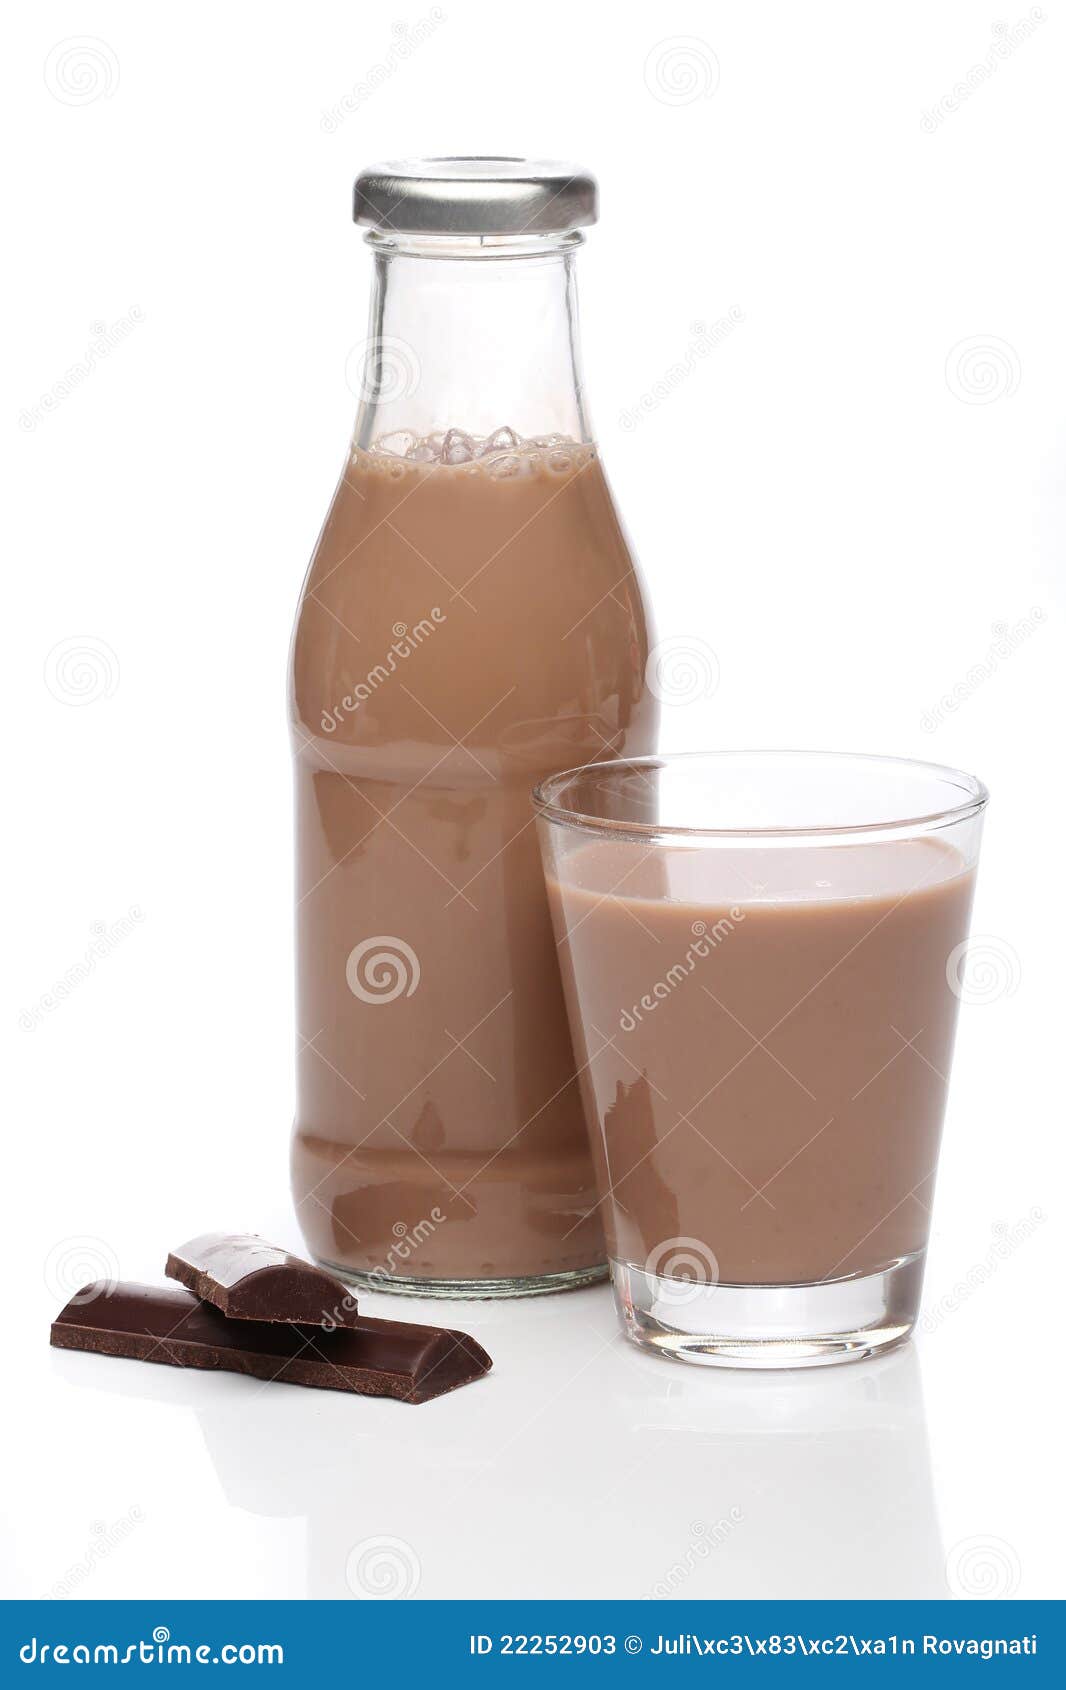 Download Bottle And Glass Of Chocolate Milk Stock Image Image Of White Cacao 22252903 Yellowimages Mockups